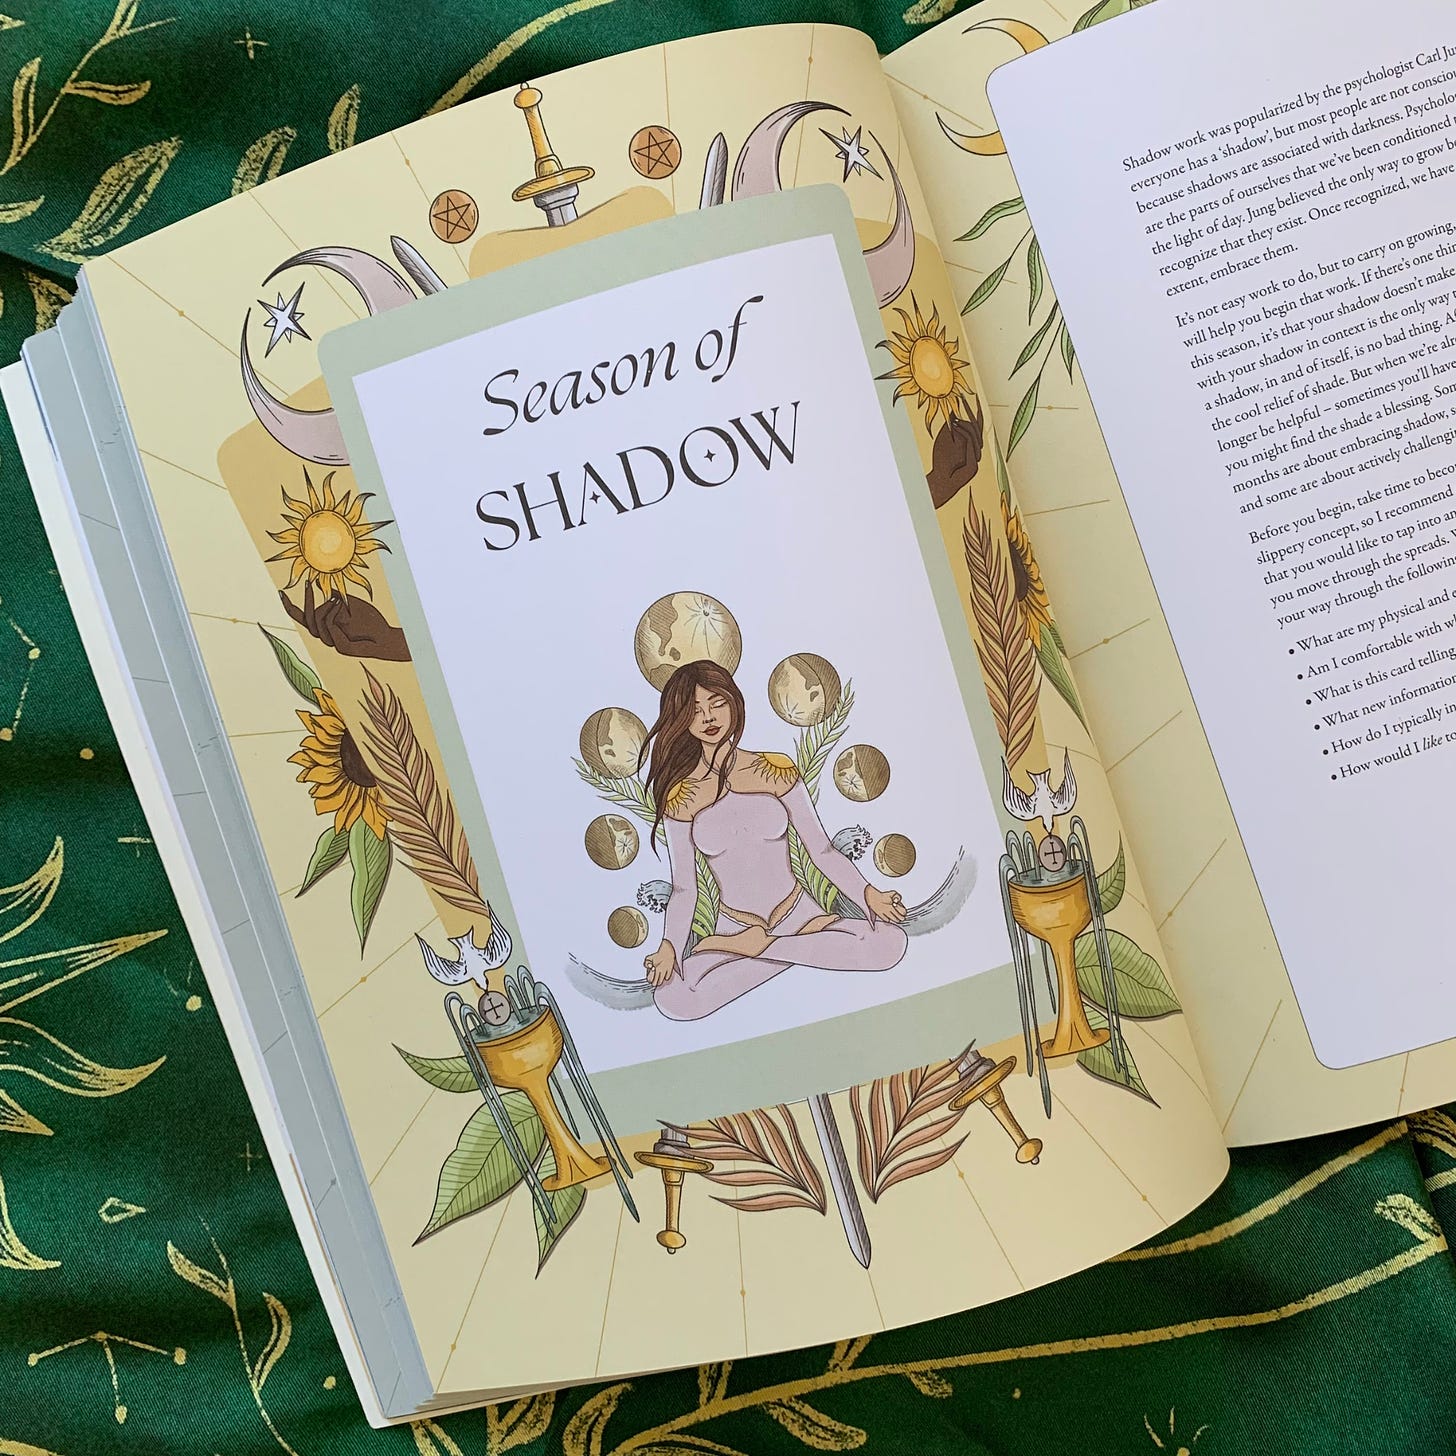 An illustrated page from the Season of Shadow chapter in The Tarot Spreads Yearbook by Chelsey Pippin Mizzi